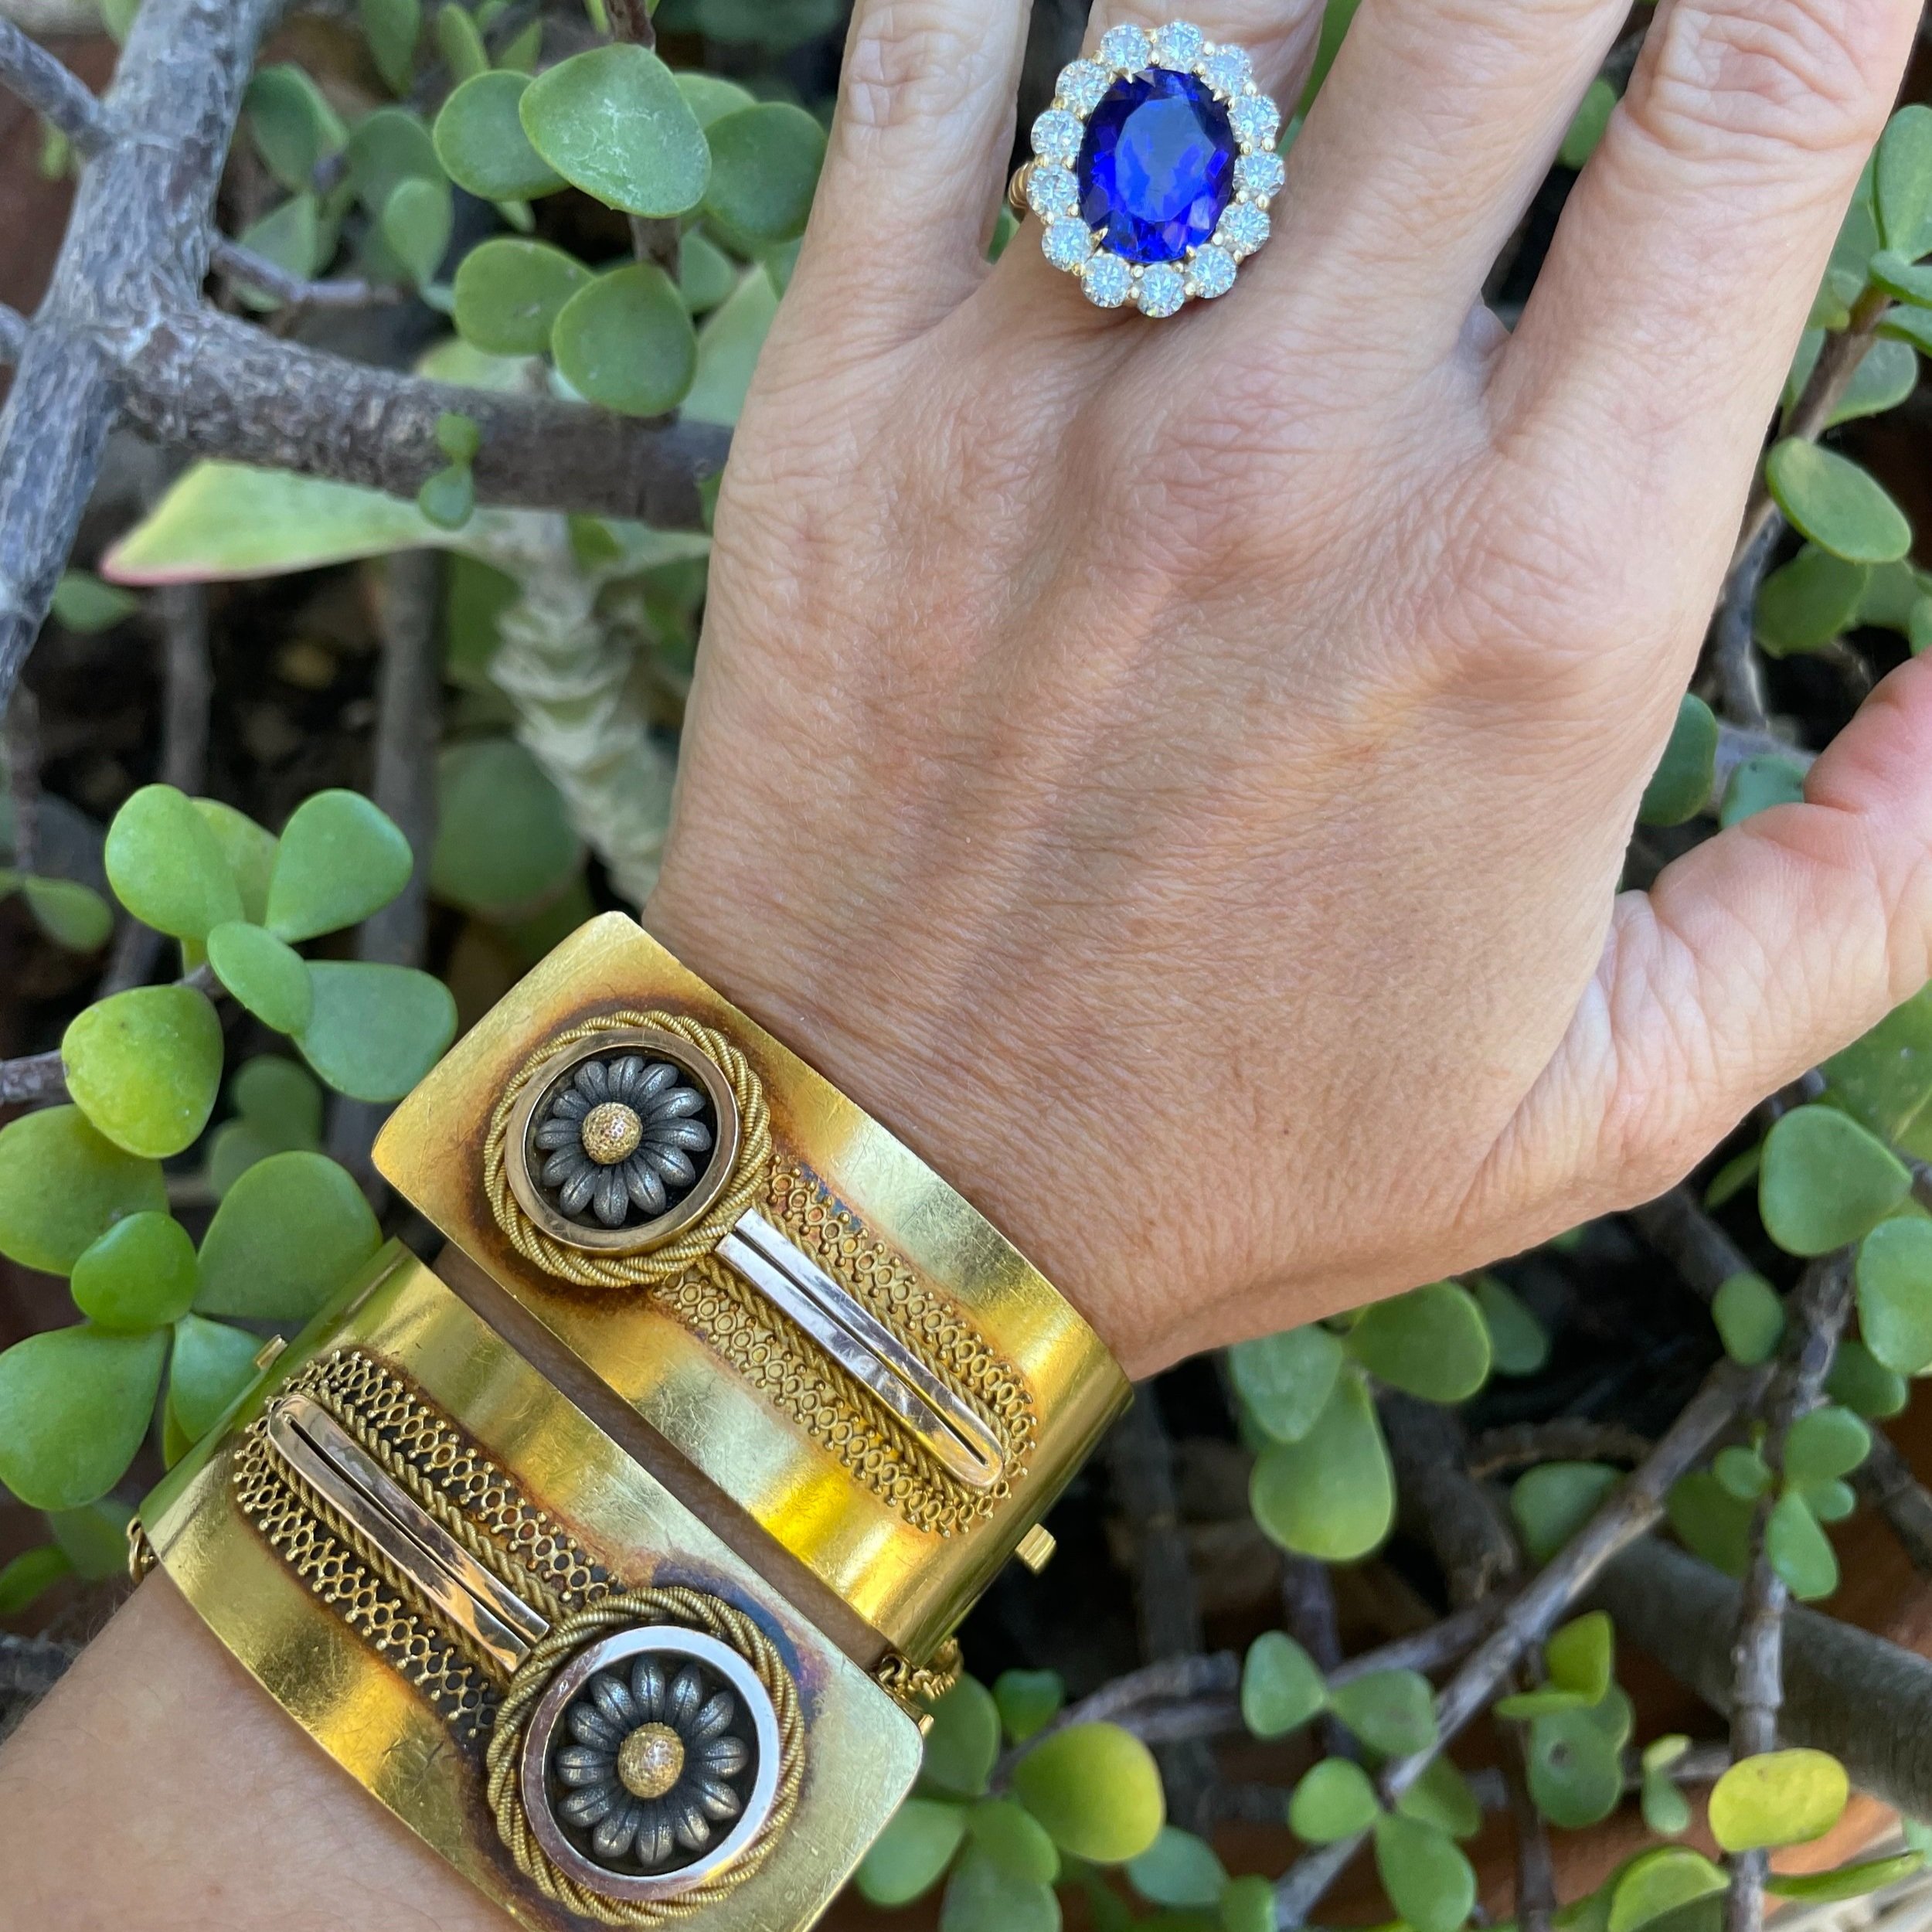 Jewelry that makes Randi feel strong: a pair of matching 14k gold cuffs from the 1890s – total Wonder Woman vibes! 